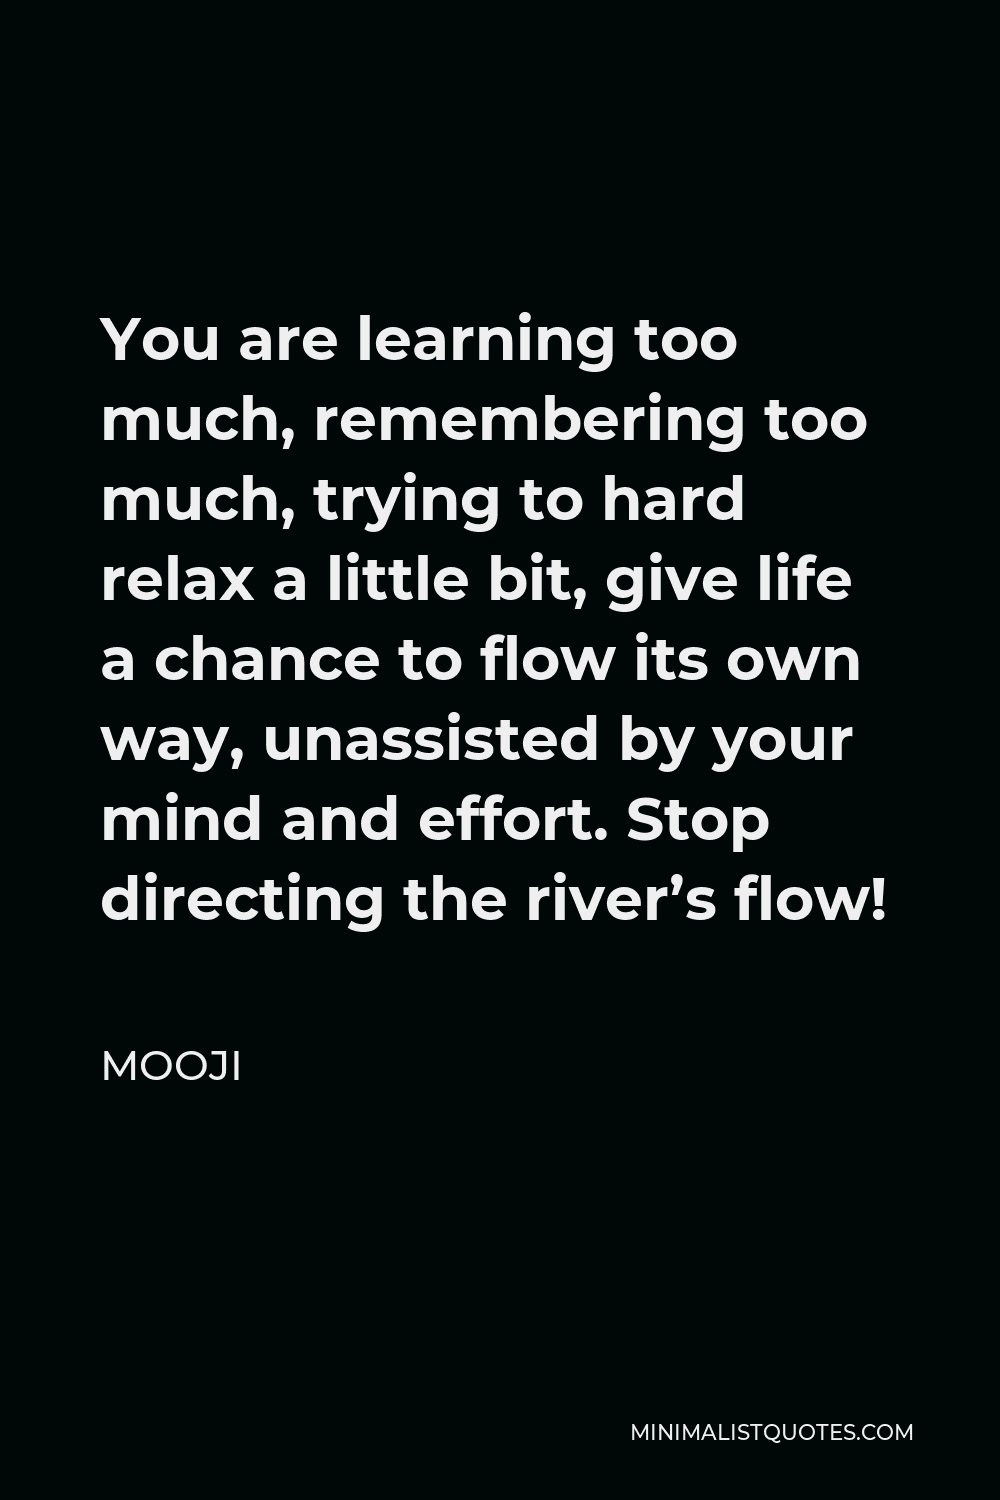 Mooji Quote - You are learning too much, remembering too much, trying to hard relax a little bit, give life a chance to flow its own way, unassisted by your mind and effort. Stop directing the river’s flow!